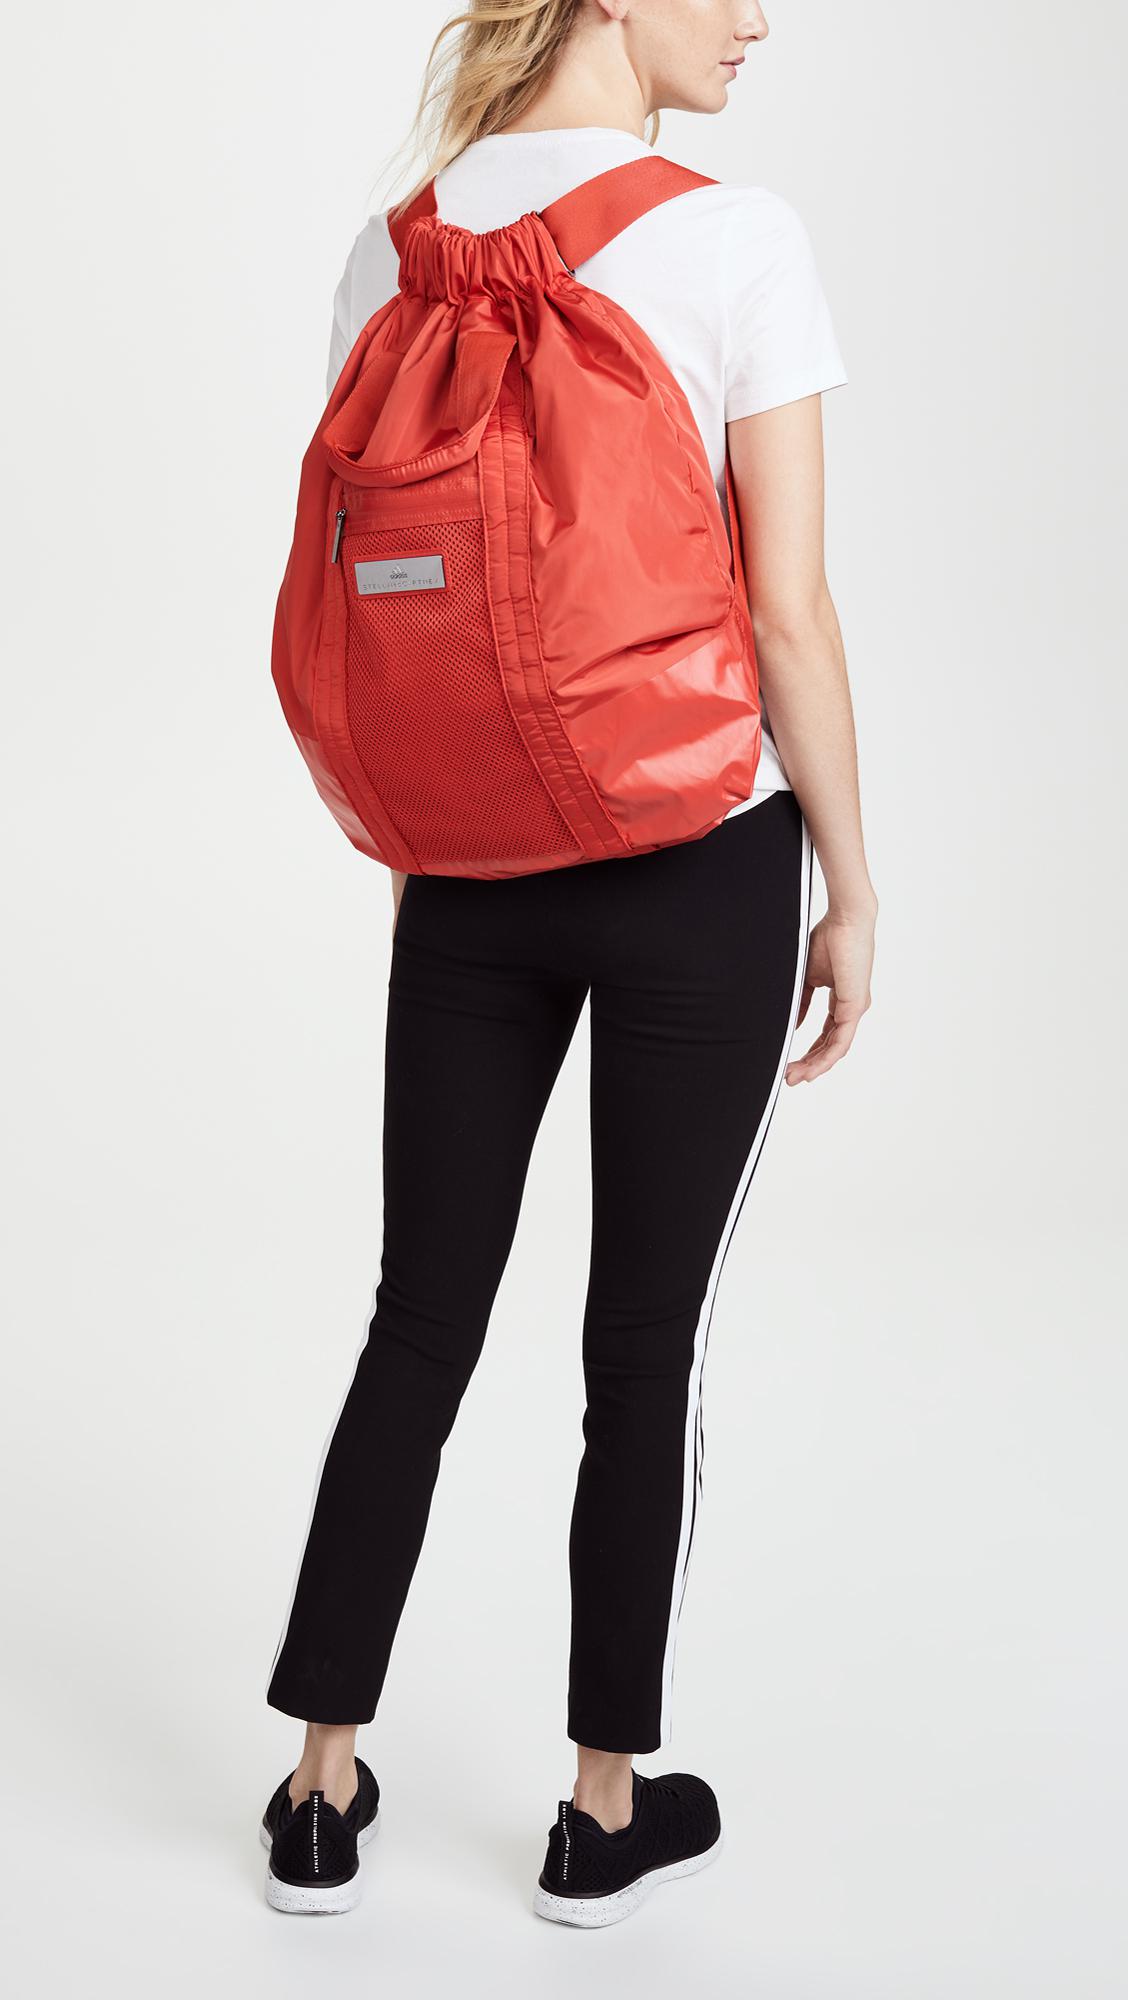 adidas By Stella McCartney Gym Sack Backpack in Red | Lyst